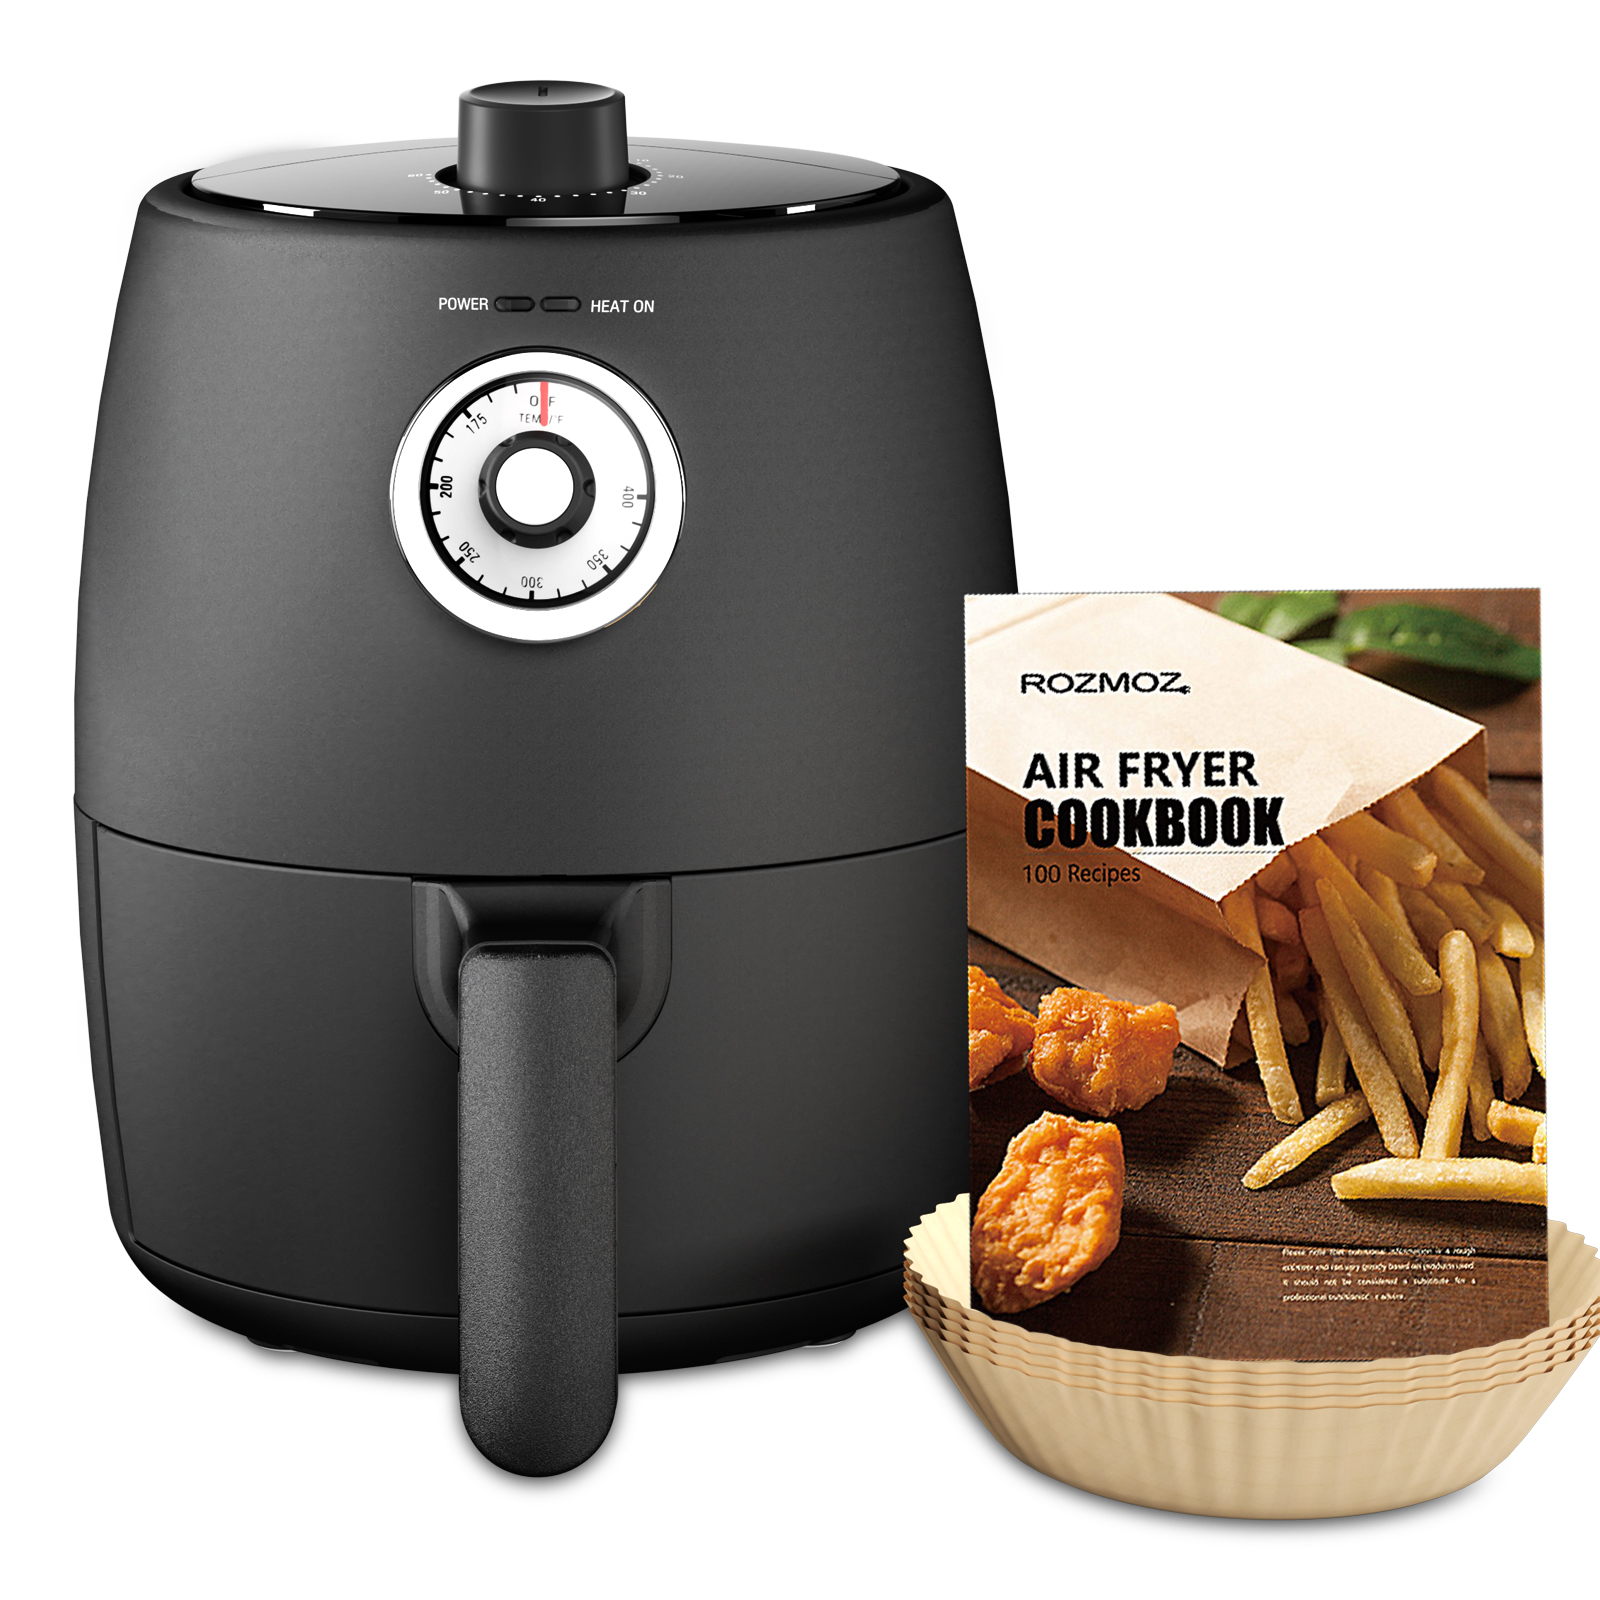 MOOSOO Small Air Fryer, 2 Quart Electric Oil-Less Air Fryer Oven Cooker with Air Fryer Liner, Cookbook - image 1 of 8